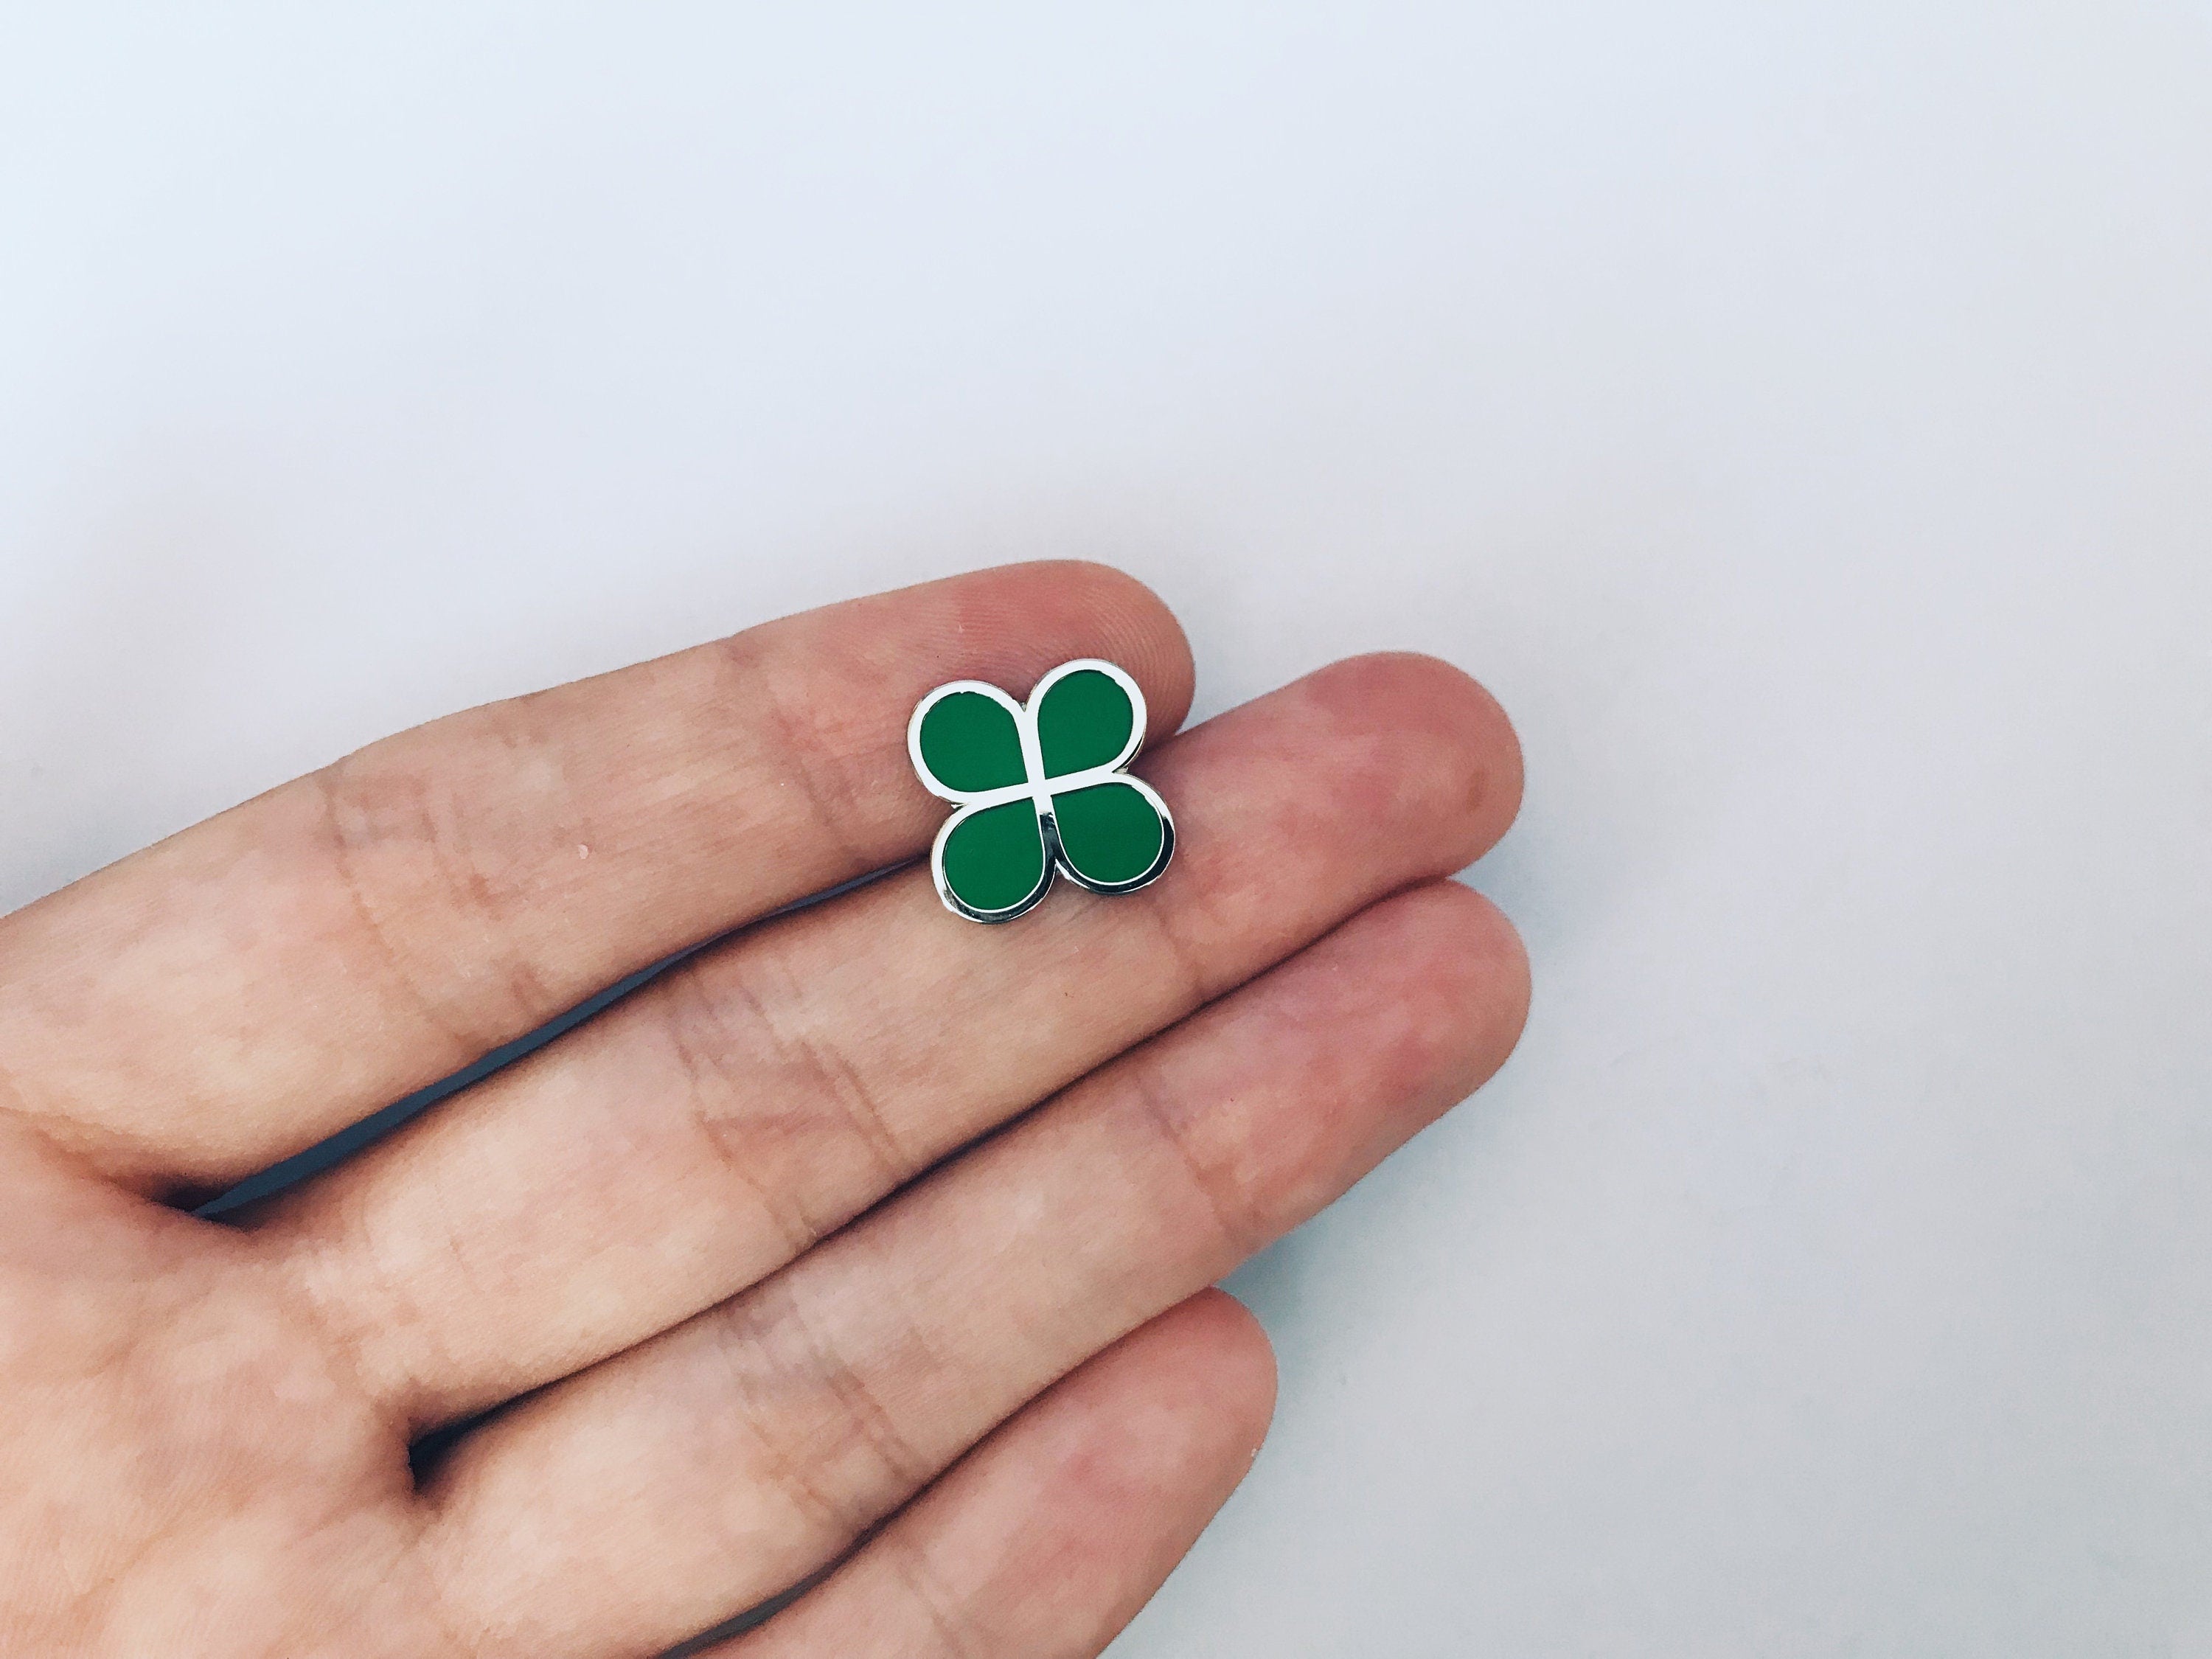 Lucky Clover Enamel Pin - SpaceX Mission Inspired Badge / Brooch - Space / Astronomy Gift